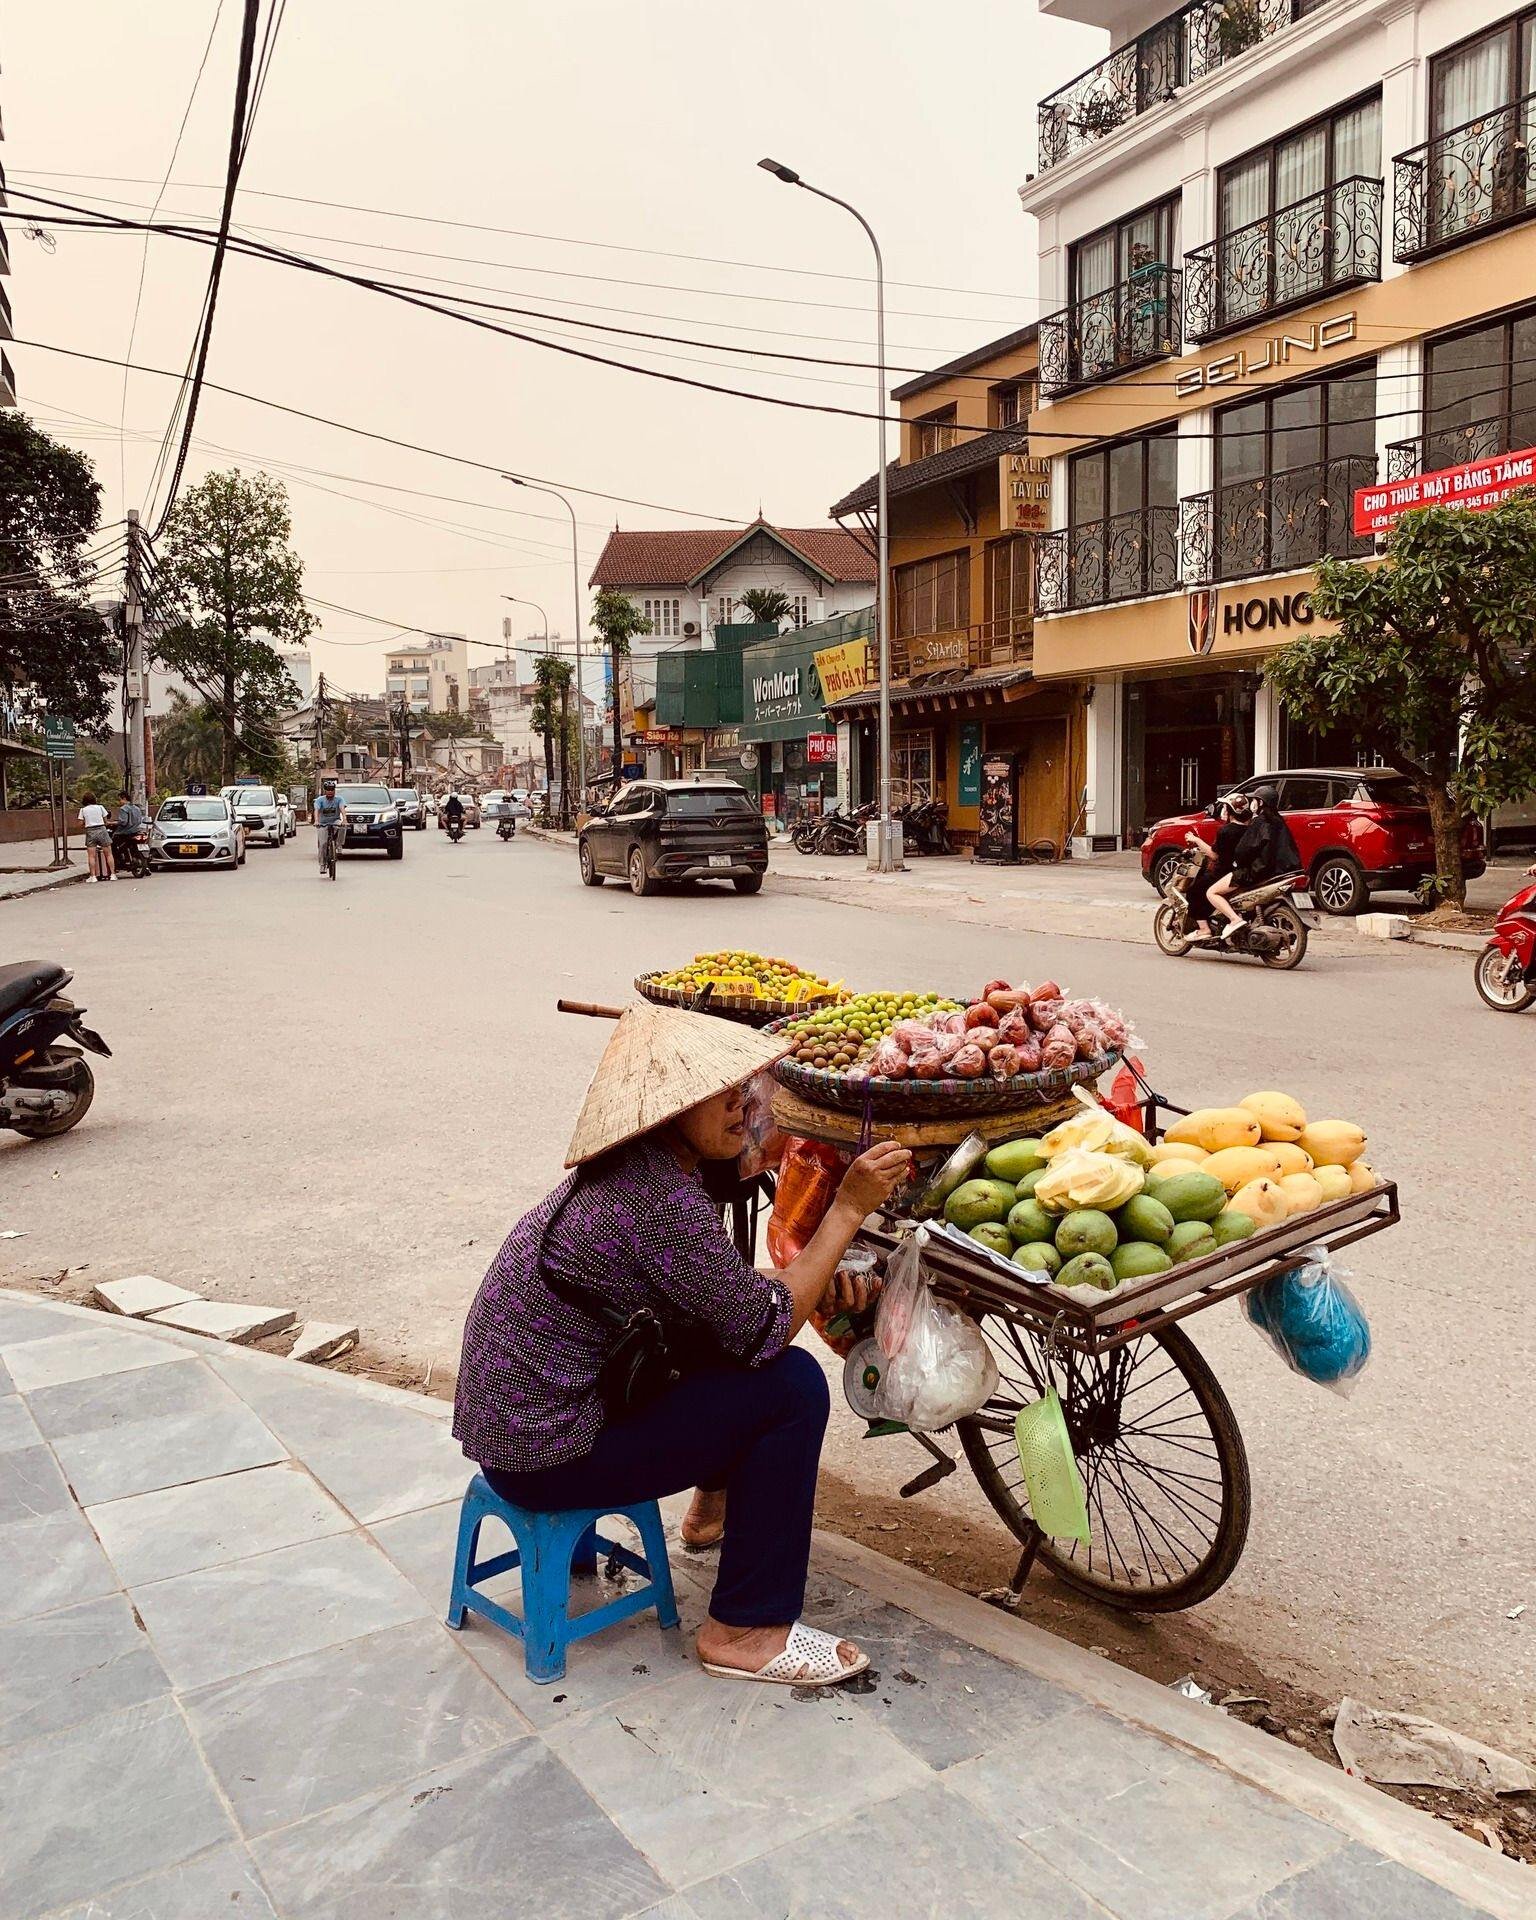 I can understand how this city may not be for everyone. 

Hanoi has a vibe and energy that does not hide, it's very much in your face.

The traffic is loud and chaotic, the streets are narrow and old - It is distinct in its grit, and this is what giv